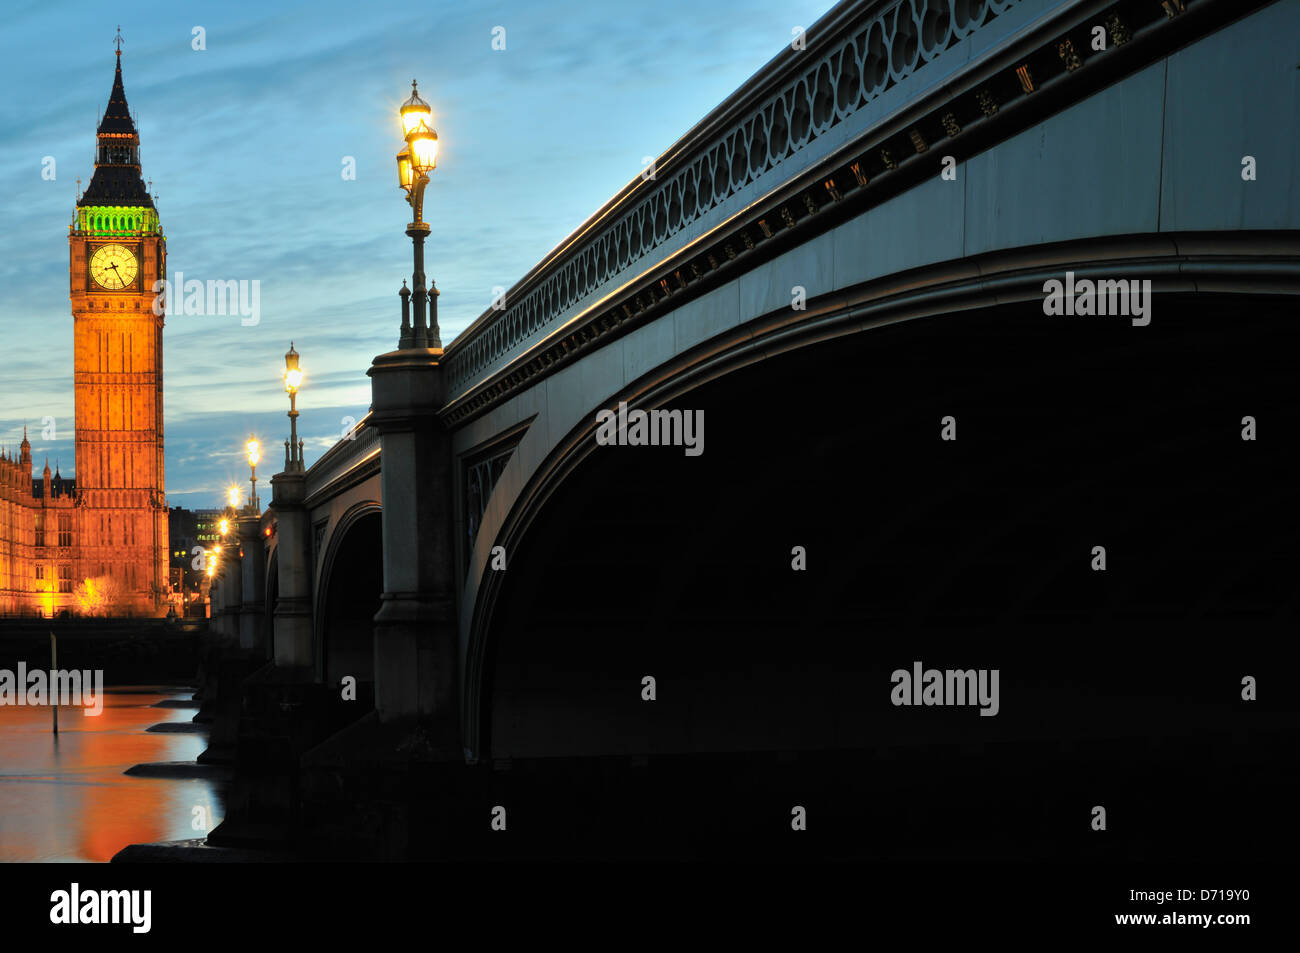 Westminster Bridge and Big Ben clock tower, London UK, early evening, with floodlighting. Stock Photo